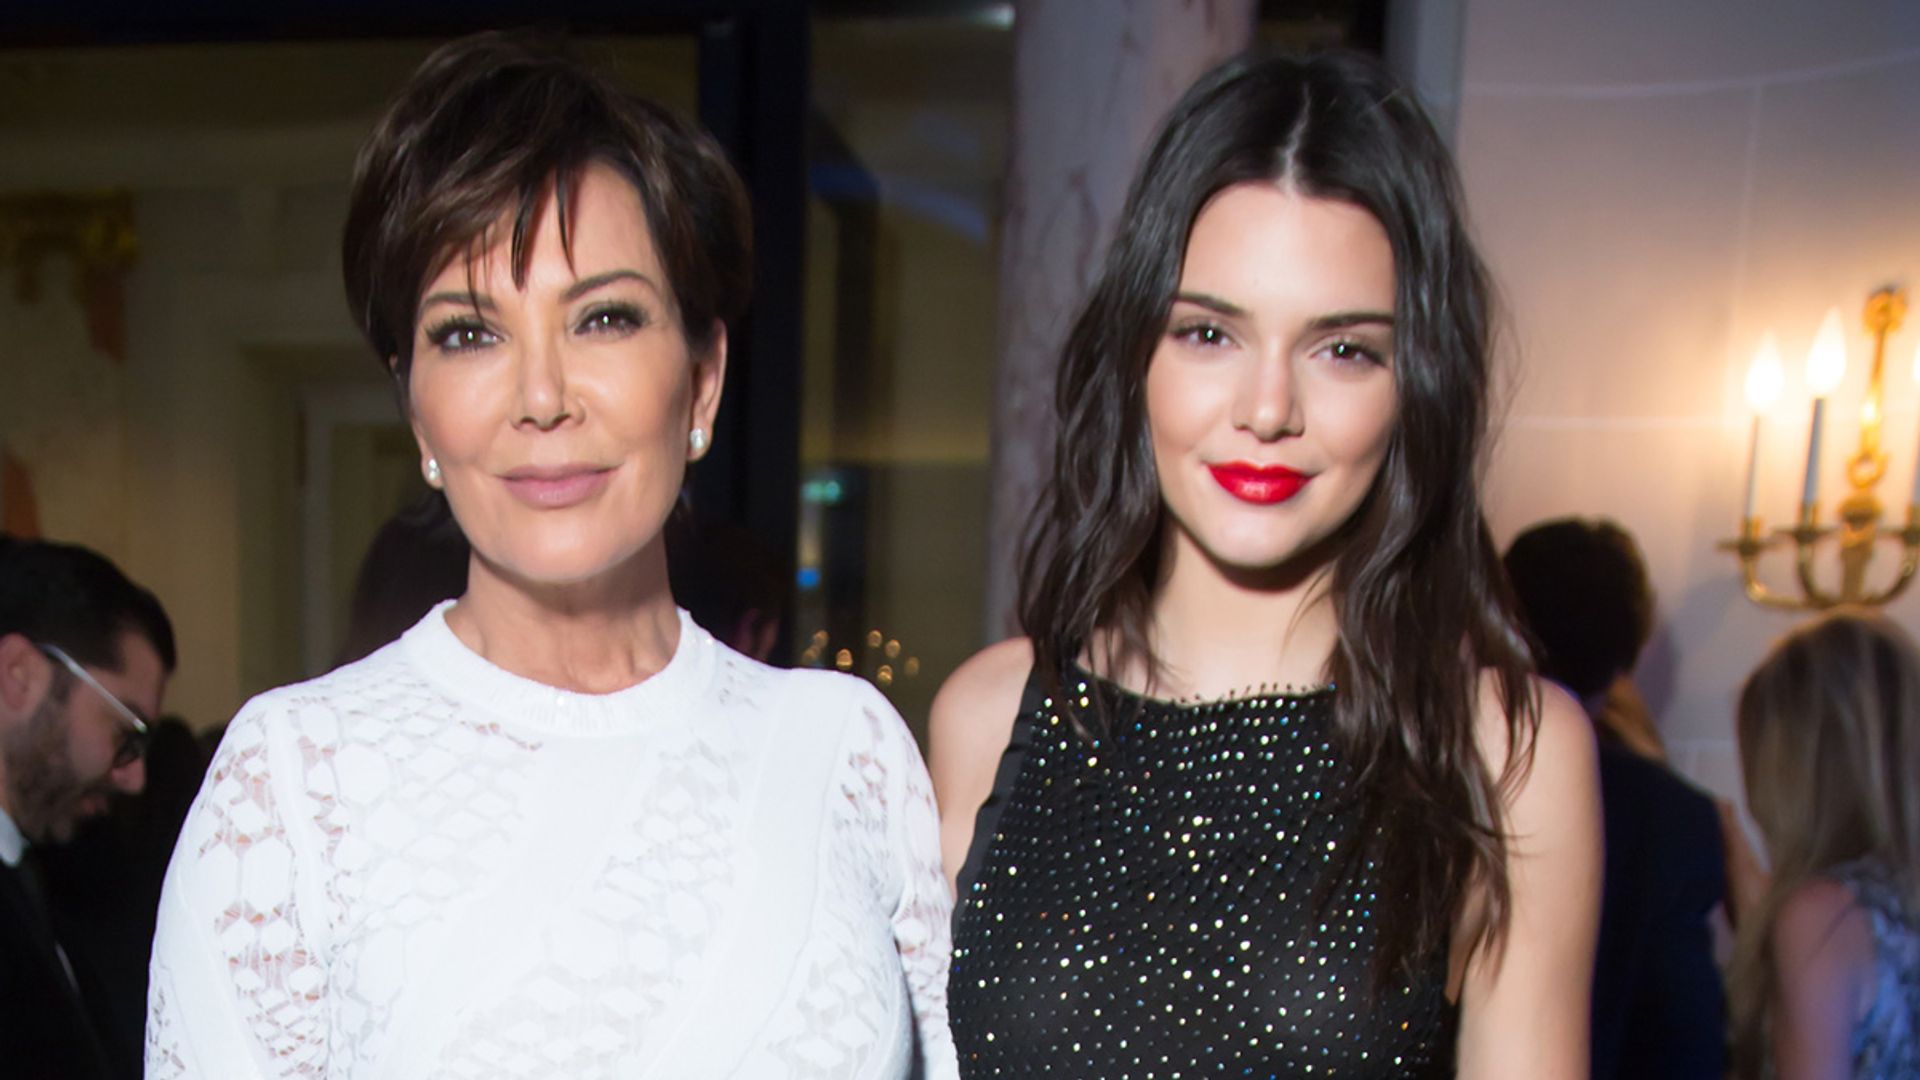 Kris Jenner responds to criticism over Kendall Jenner's controversial birthday party